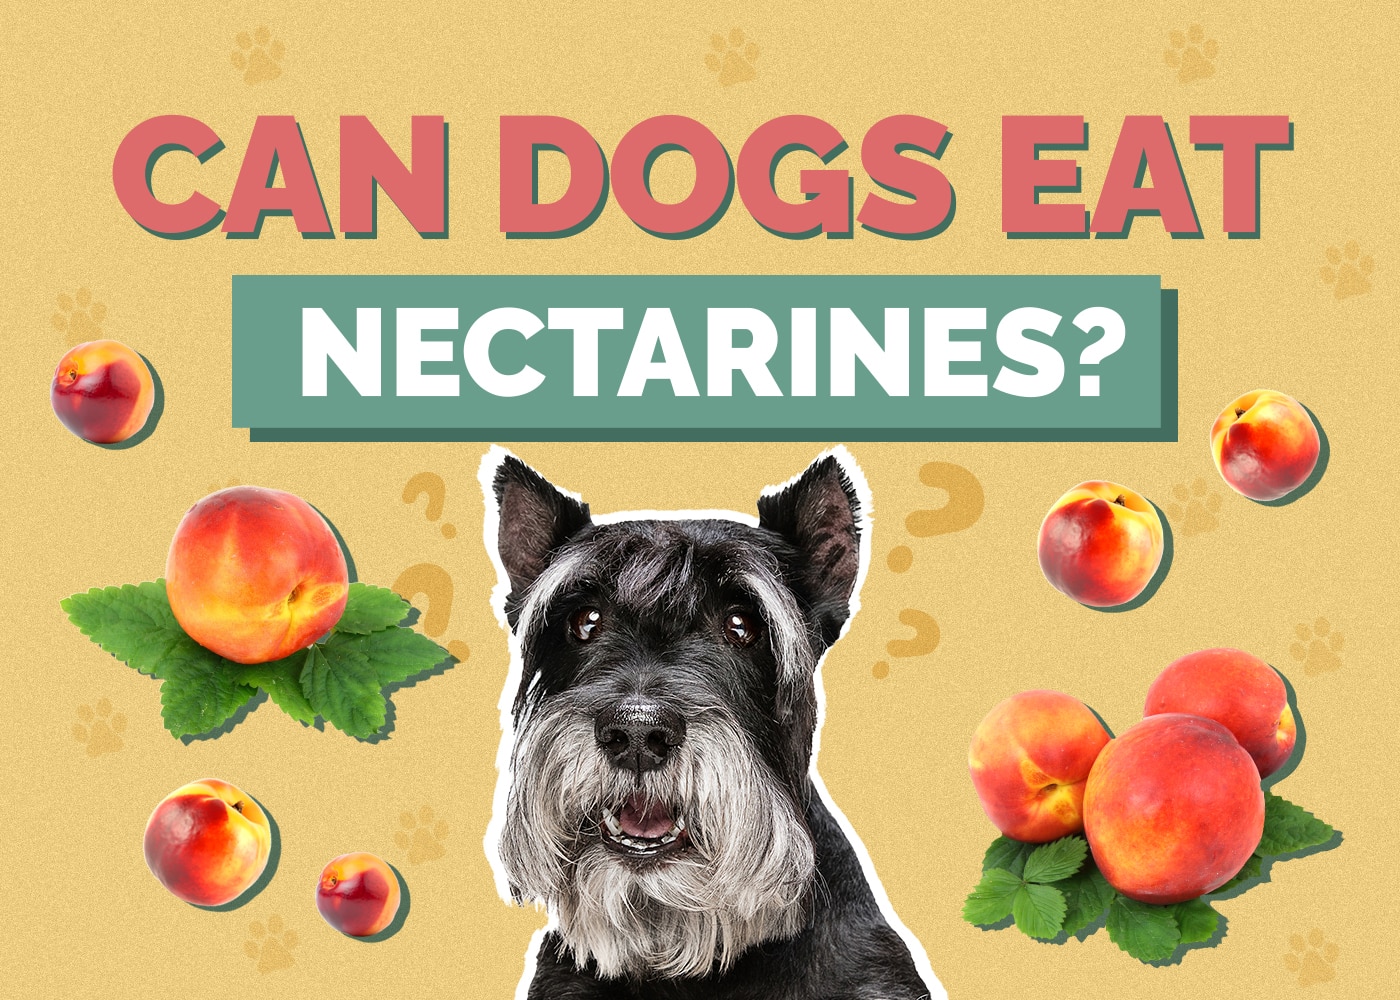 Can Dogs Eat nectarines